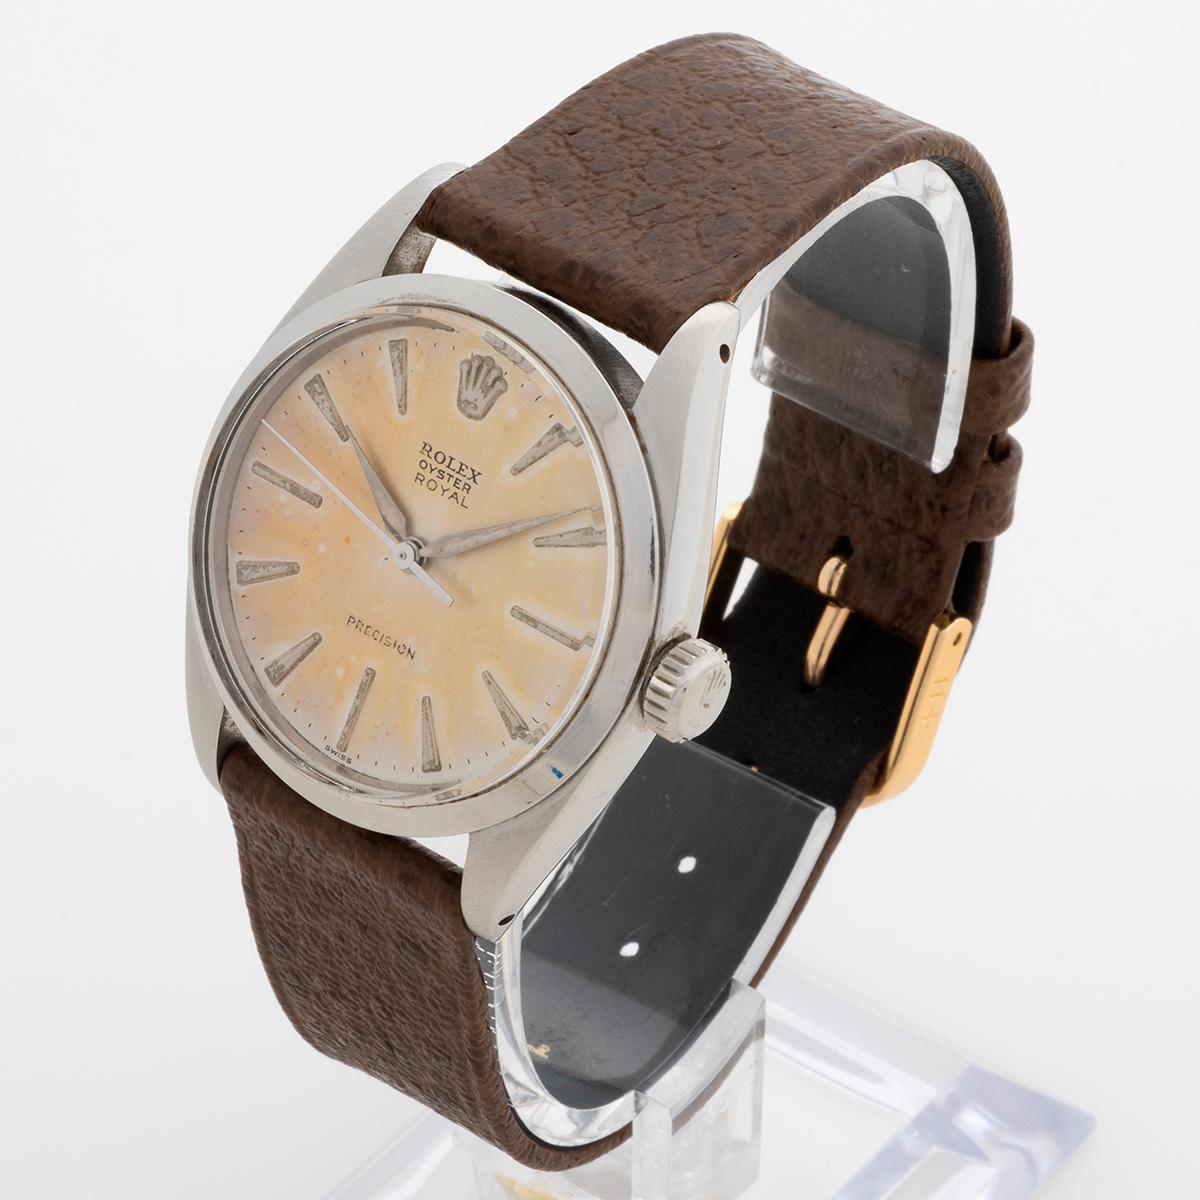 Our vintage is presented in original condition with strong case and lugs and clearly visible reference and serial numbers. The original dial with dagger hands and indices has a great tropical patina. We have fitted a quality leather strap and tang